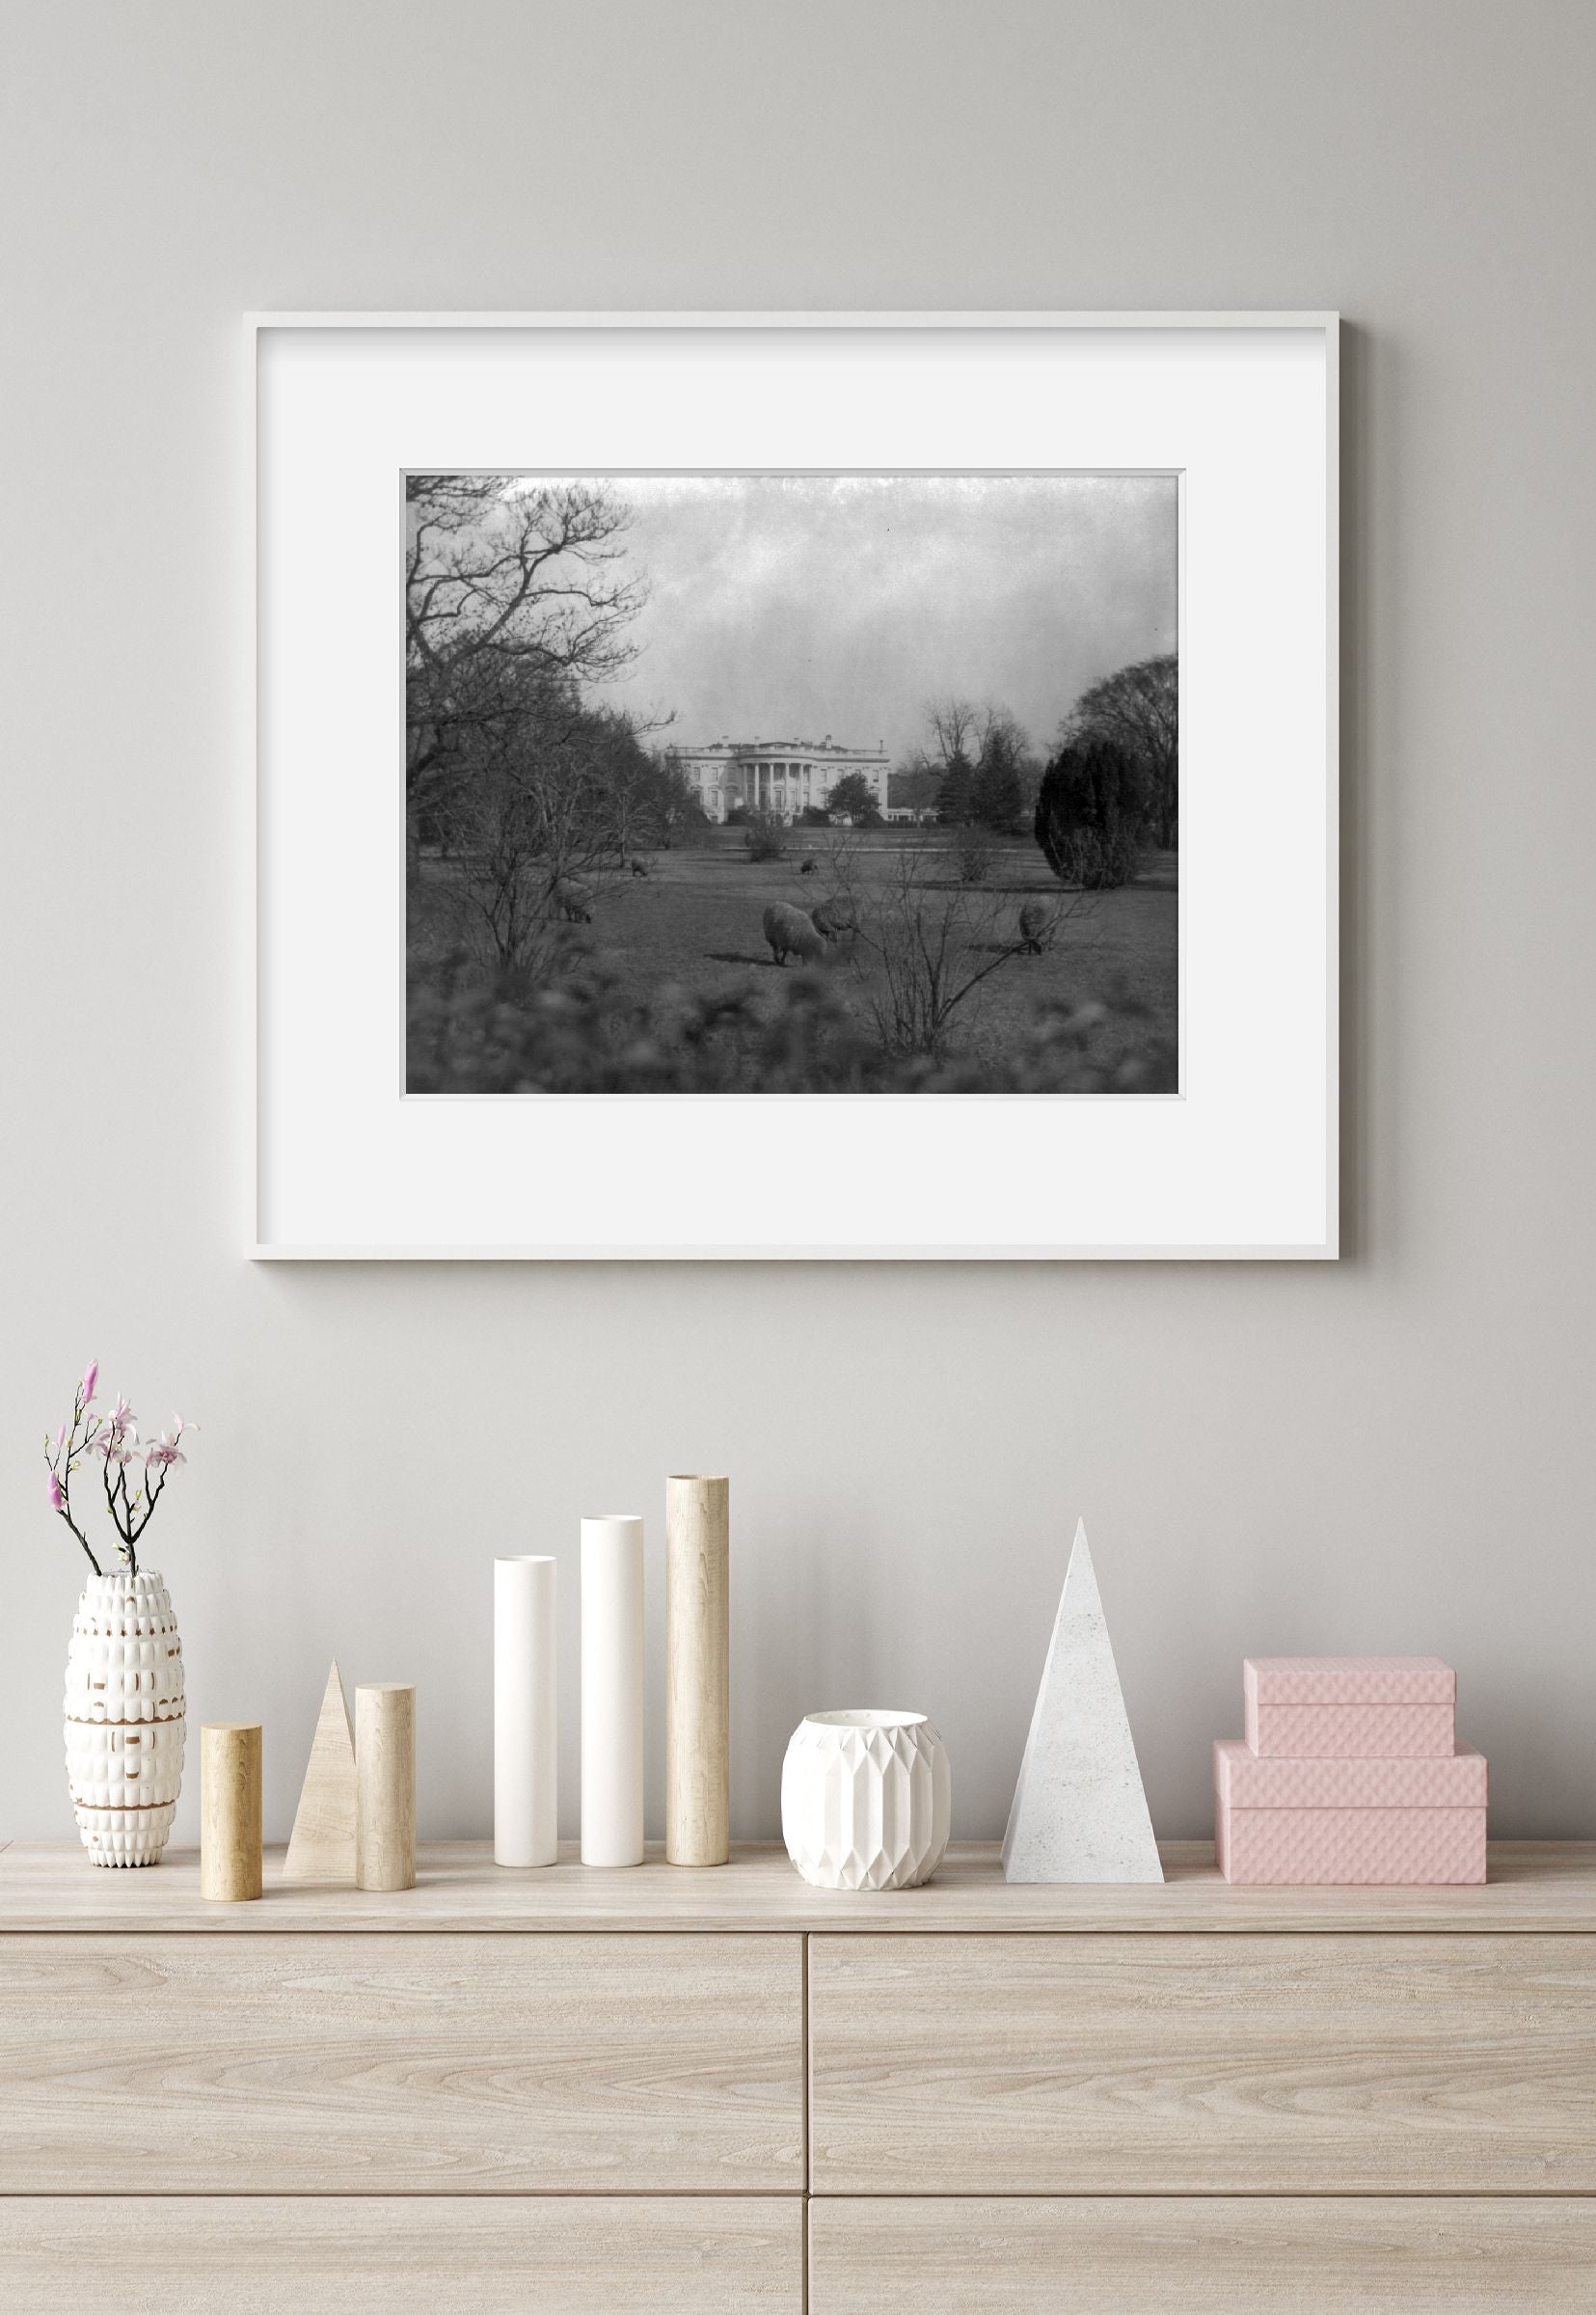 between 1914 and 1920 photograph of D.C. Wash. White House. Sheep grazing on the